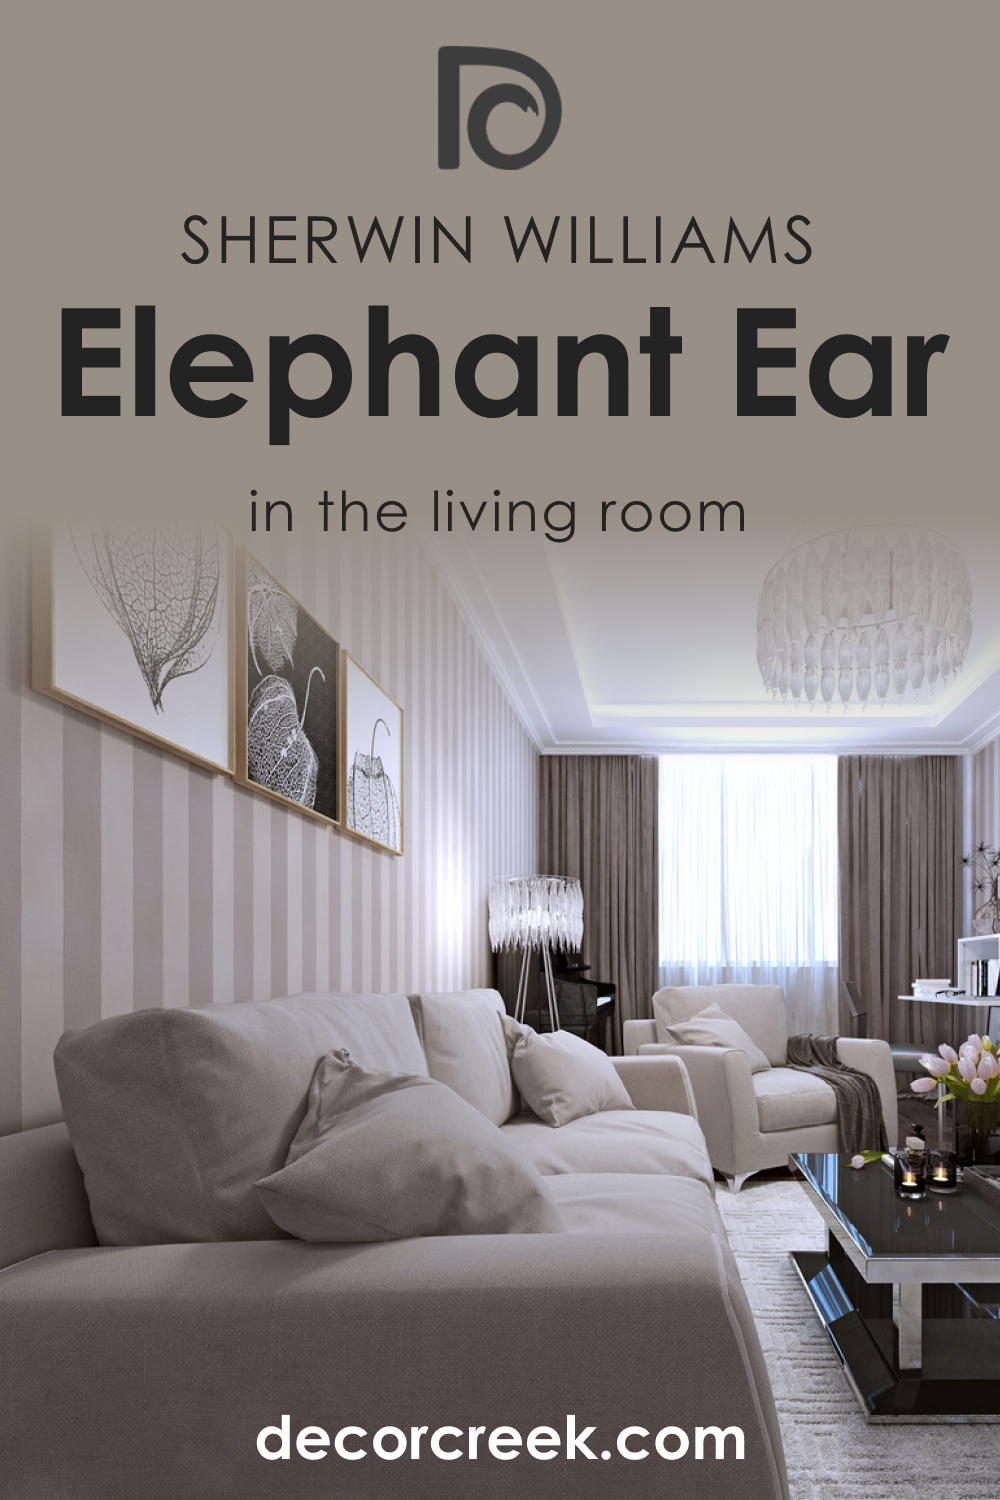 How to Use SW 9168 Elephant Ear in the Living Room?